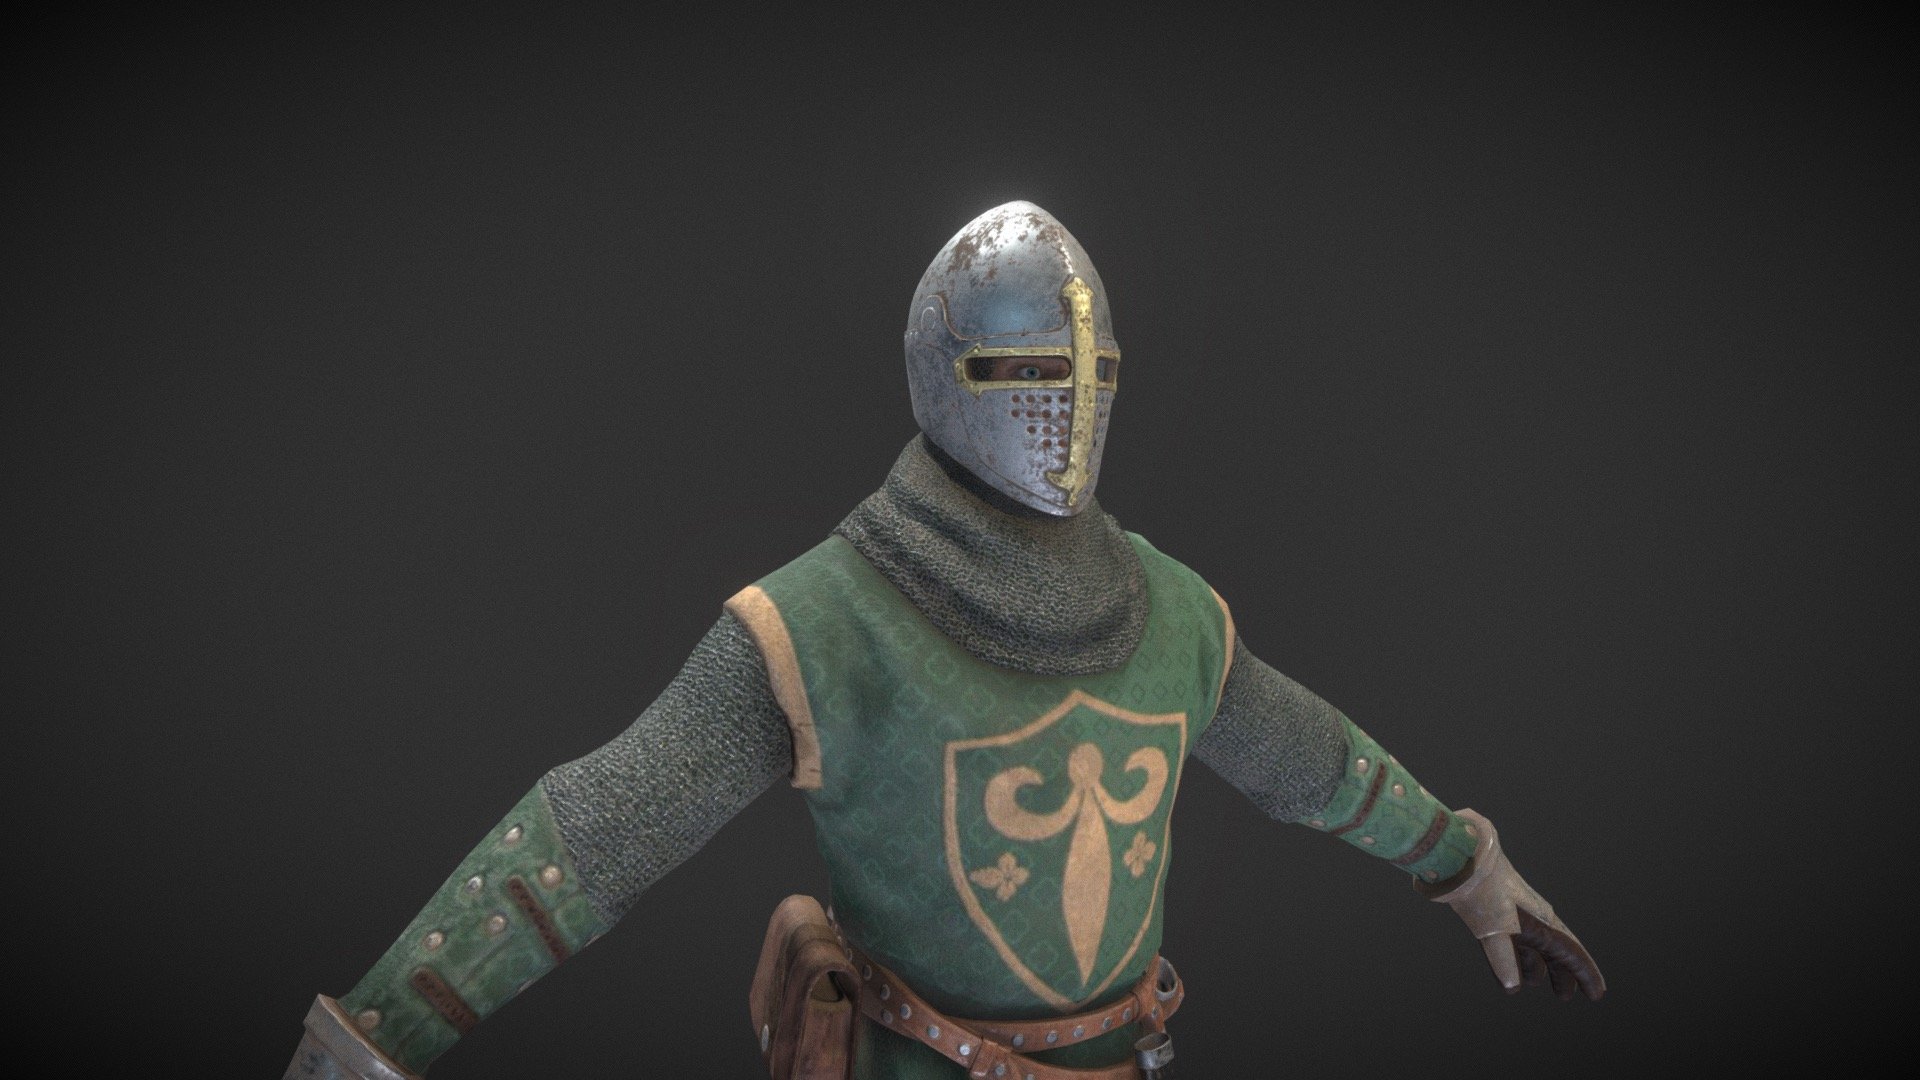 The school objective was to create a high quality game ready model in a month (the month being shortened to around 3 weeks due to Christmas break). For the model, I chose to create a medieval knight. The Green Knight, low poly was made in Maya, and high poly was made in zBrush. High res was sculpted in 2 days and low res was finished in around 2 days. The game res model was made using the quad draw tool in Maya and UVs were also cut in the software. When creating the low res, I also split some parts off in order to allow for customization as if the model had different armor sets. The textures were made in 4 days with the help of Substance Painter. I followed UE4 PBR guidelines and did every material as a procedural. I did this using generators, fill layers, etc. I did this to allow for felxiability in the texturing and allow for changes to be made if someone chose to 3d model